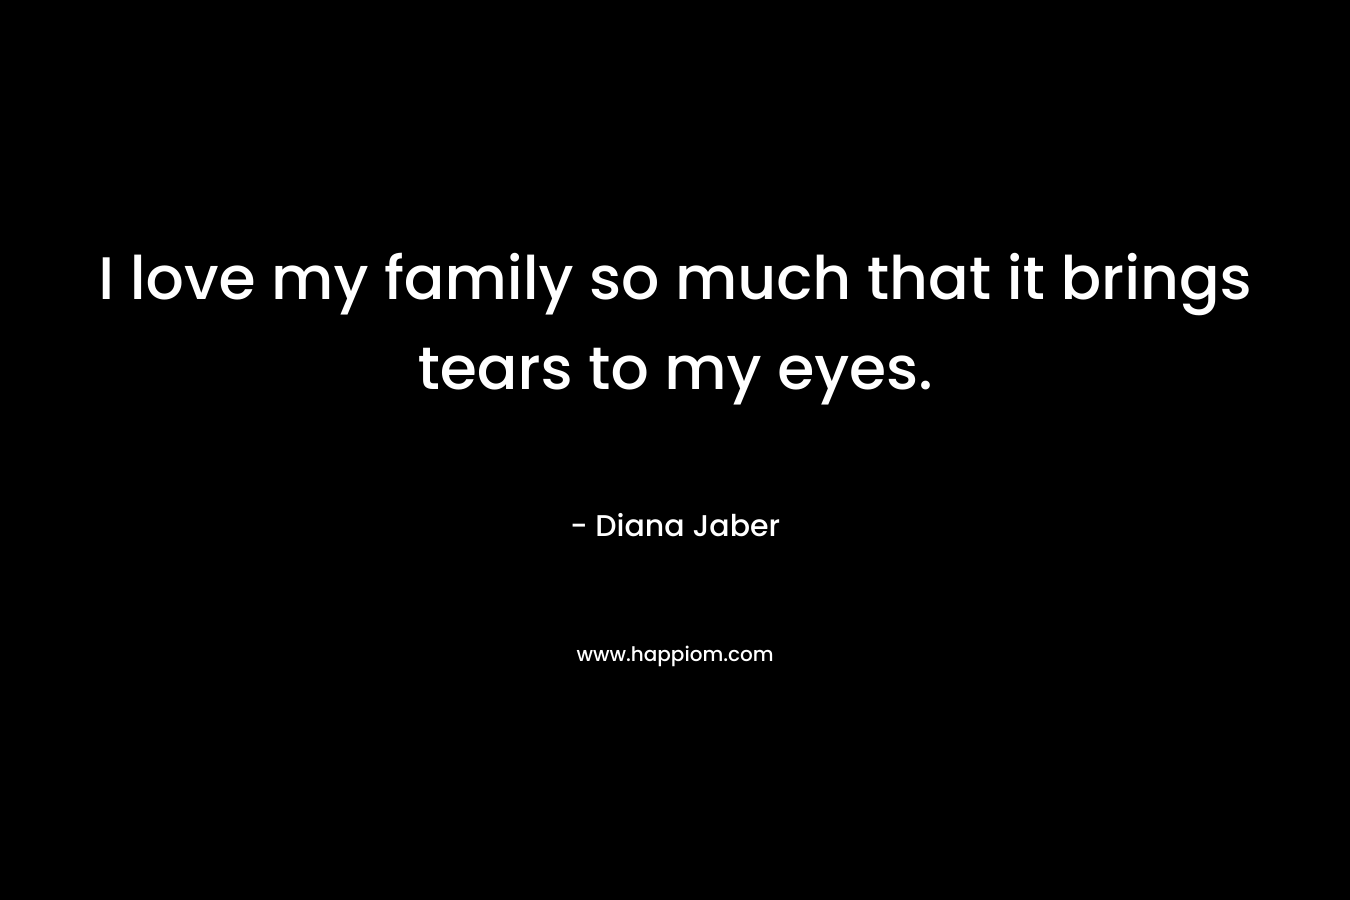 I love my family so much that it brings tears to my eyes. – Diana Jaber